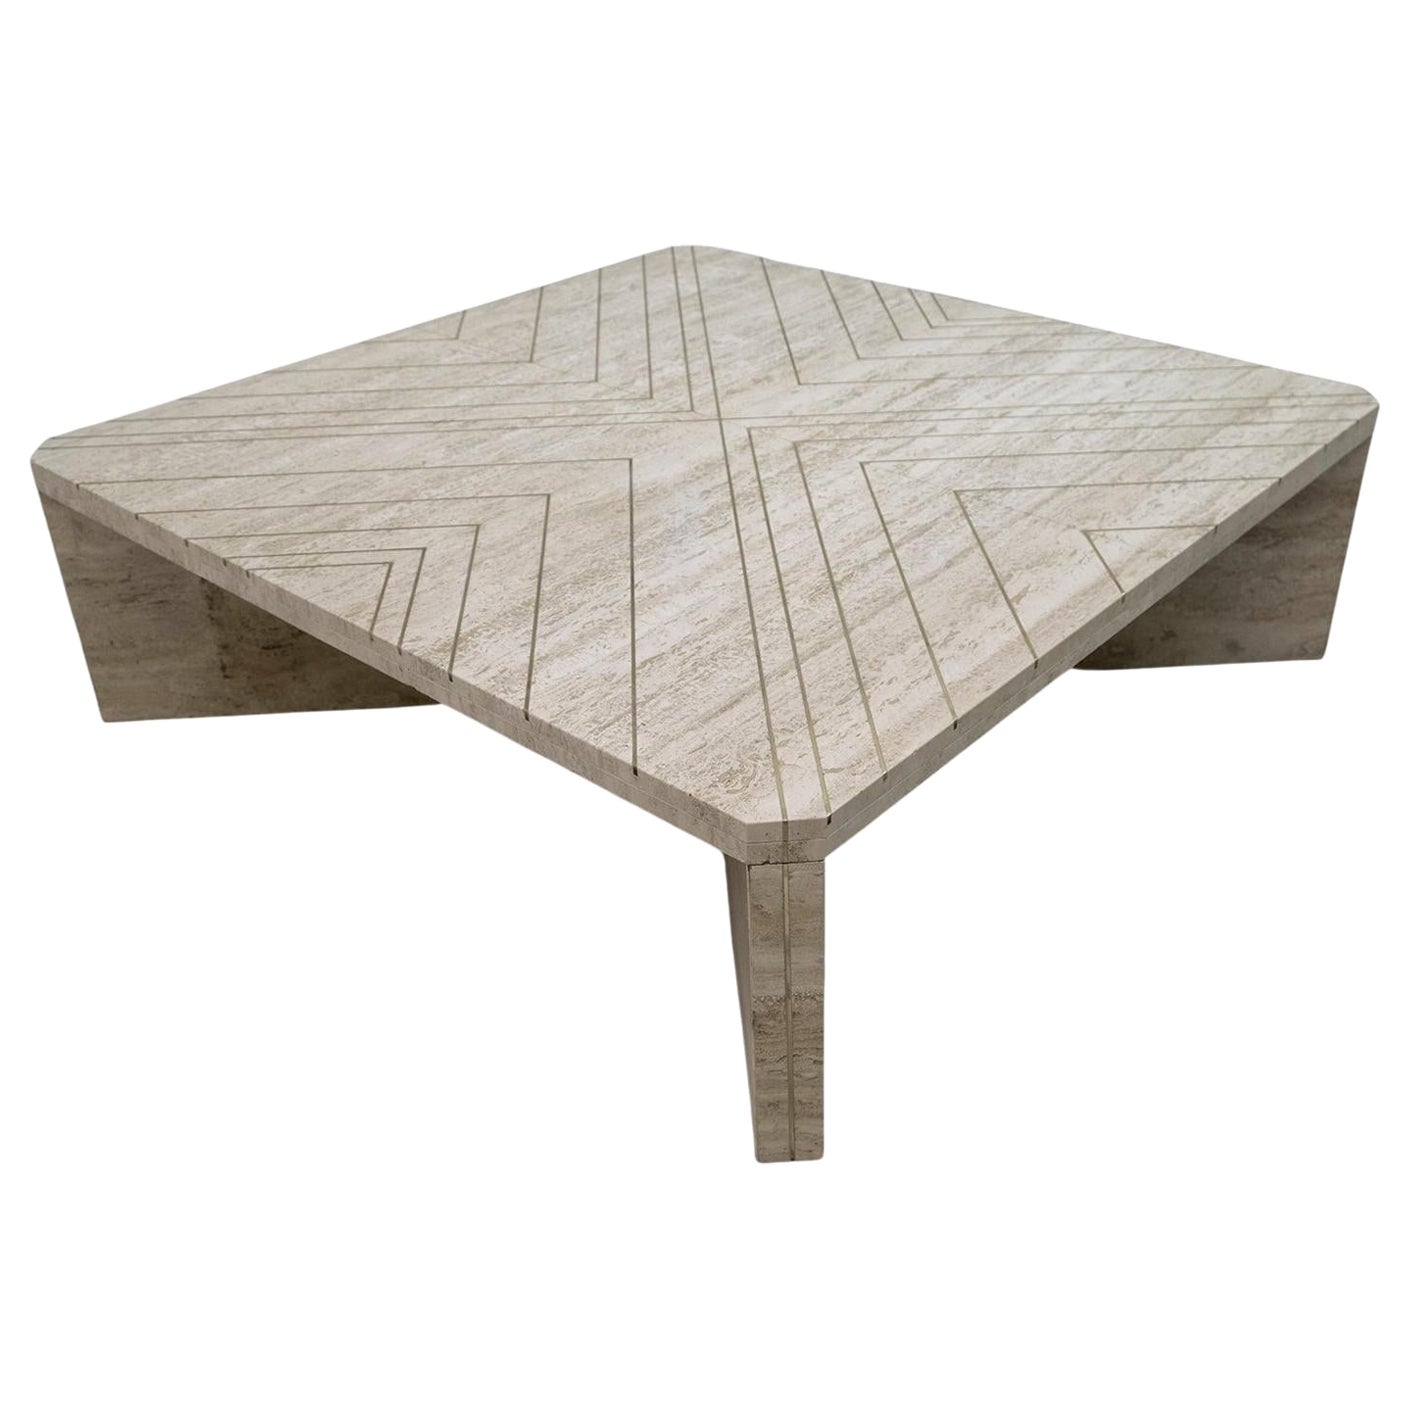 Willy Rizzo Mid-Century Italian Travertine Coffee Table with Brass Inlays, 1970s For Sale